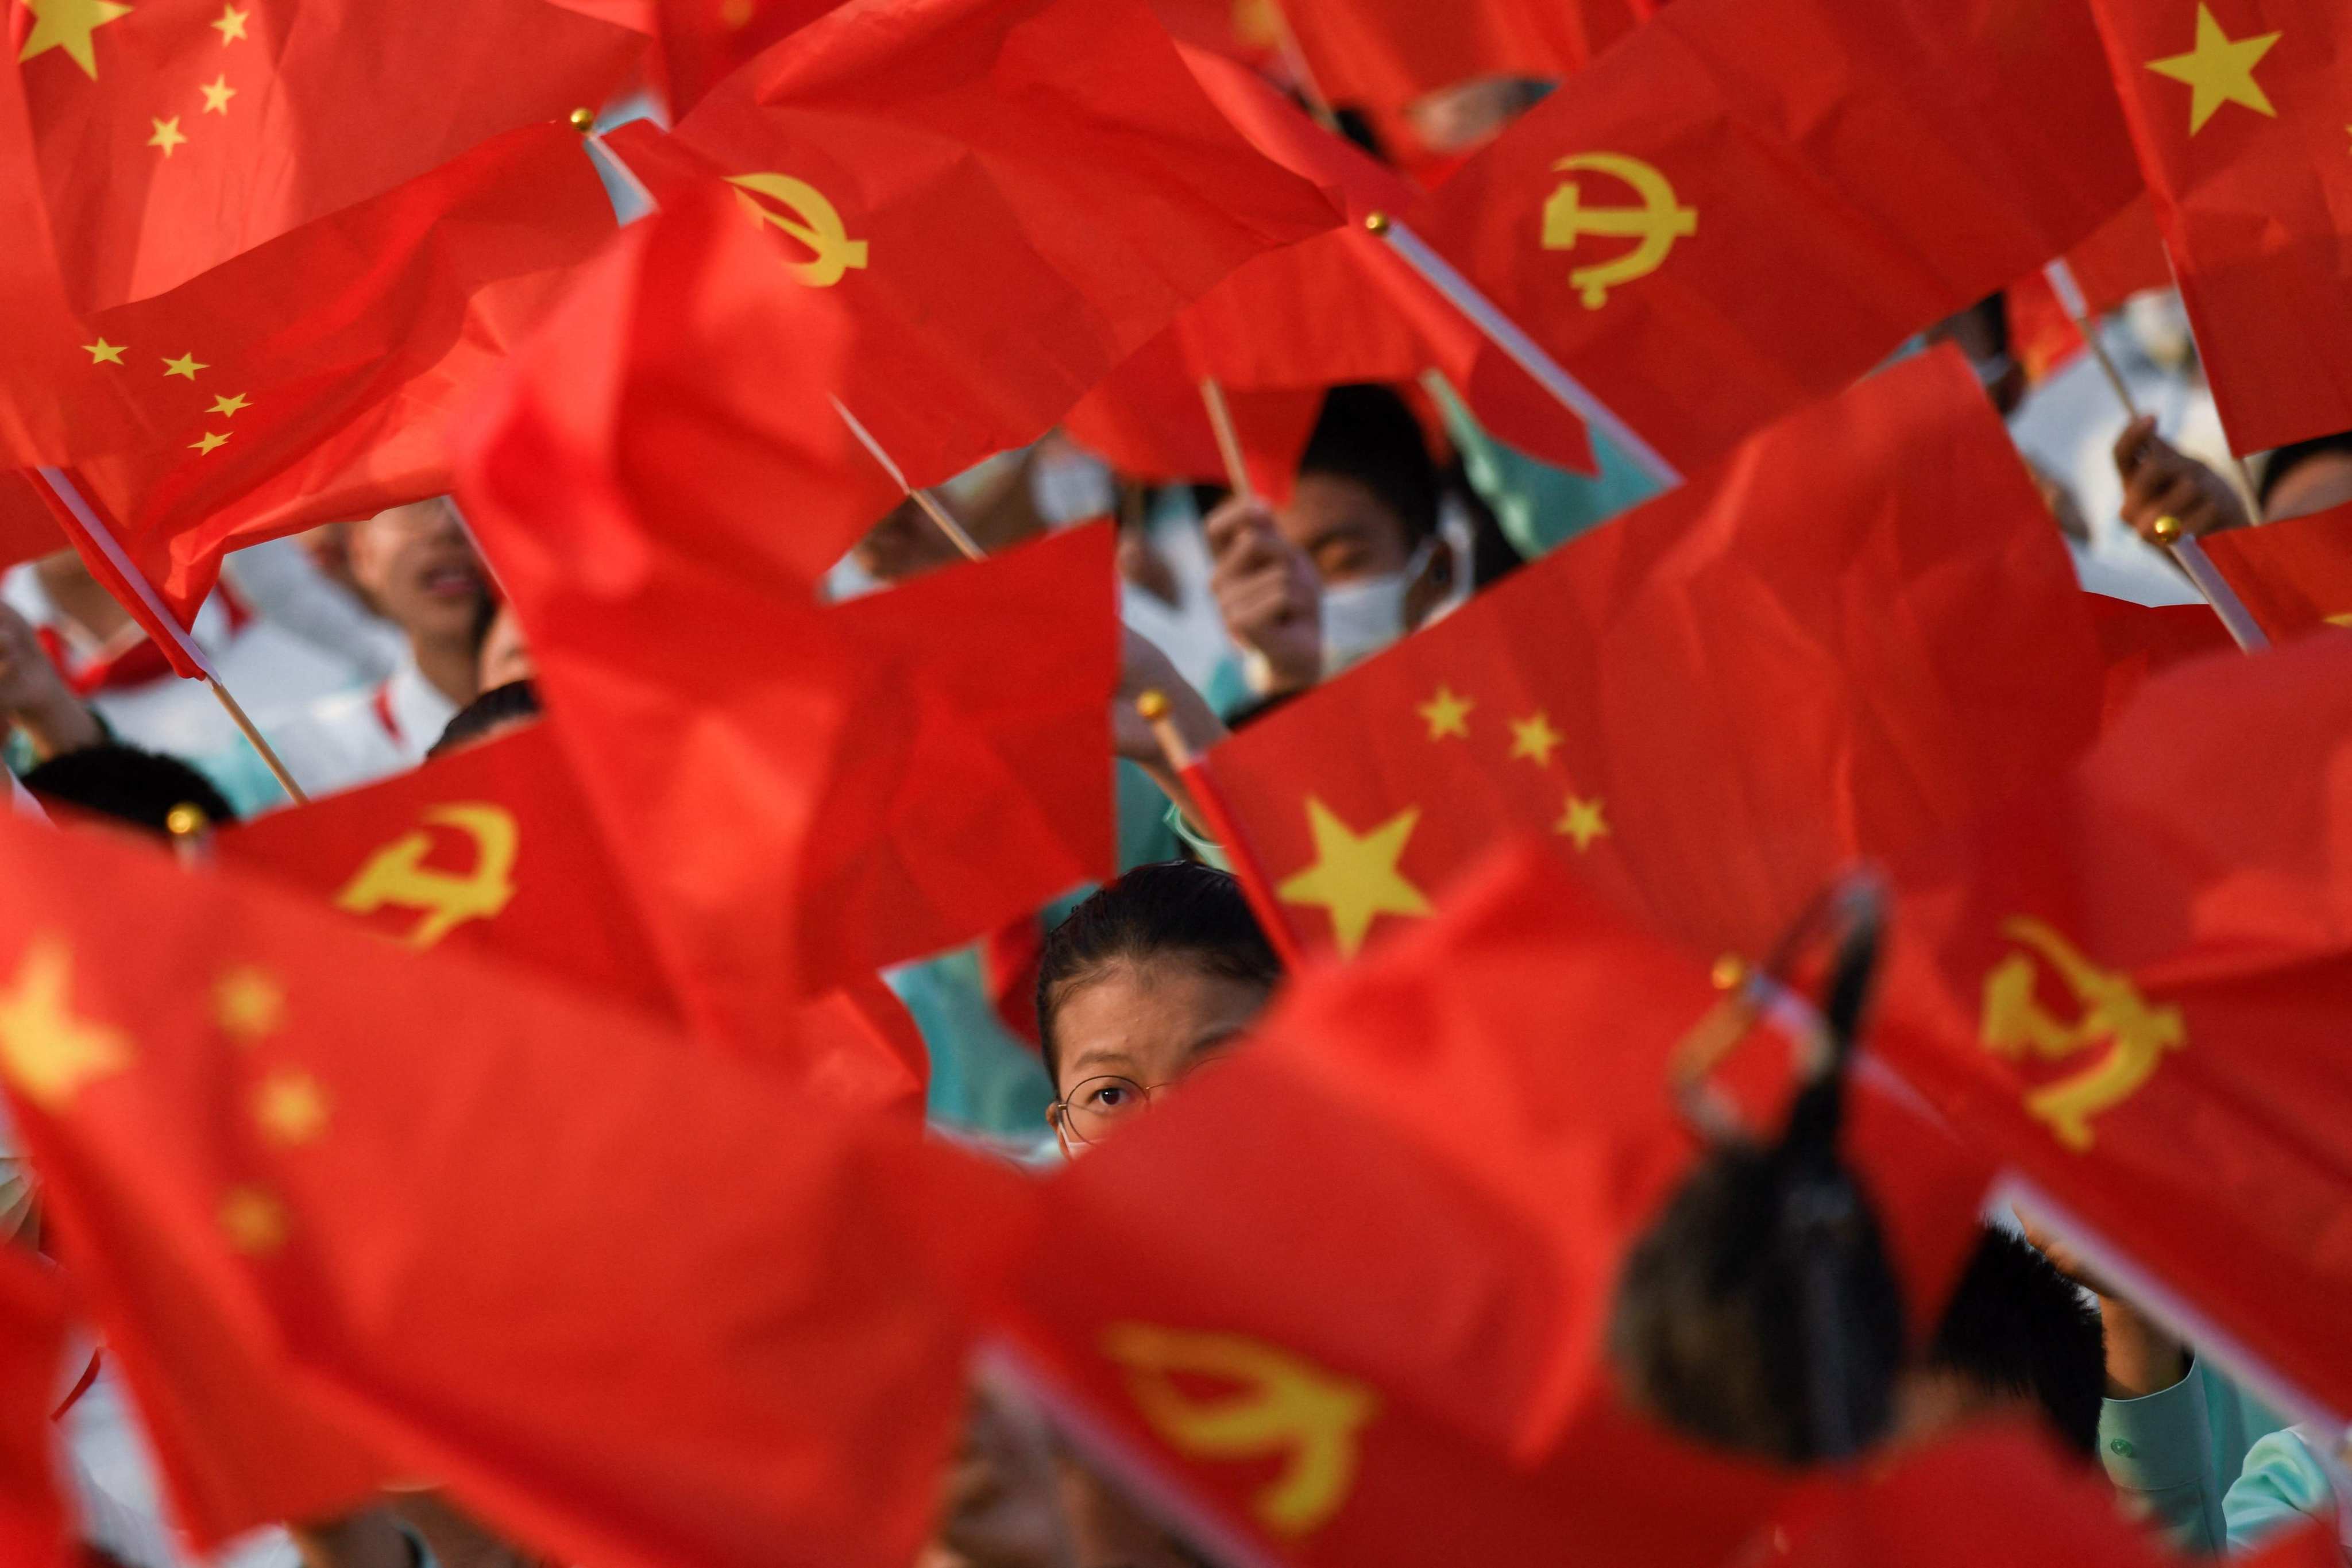 Students wave the flags of China and the Communist Party of China before celebrations in Beijing on July 1, 2021, to mark the 100th anniversary of the founding of the Communist Party of China. Photo: AFP